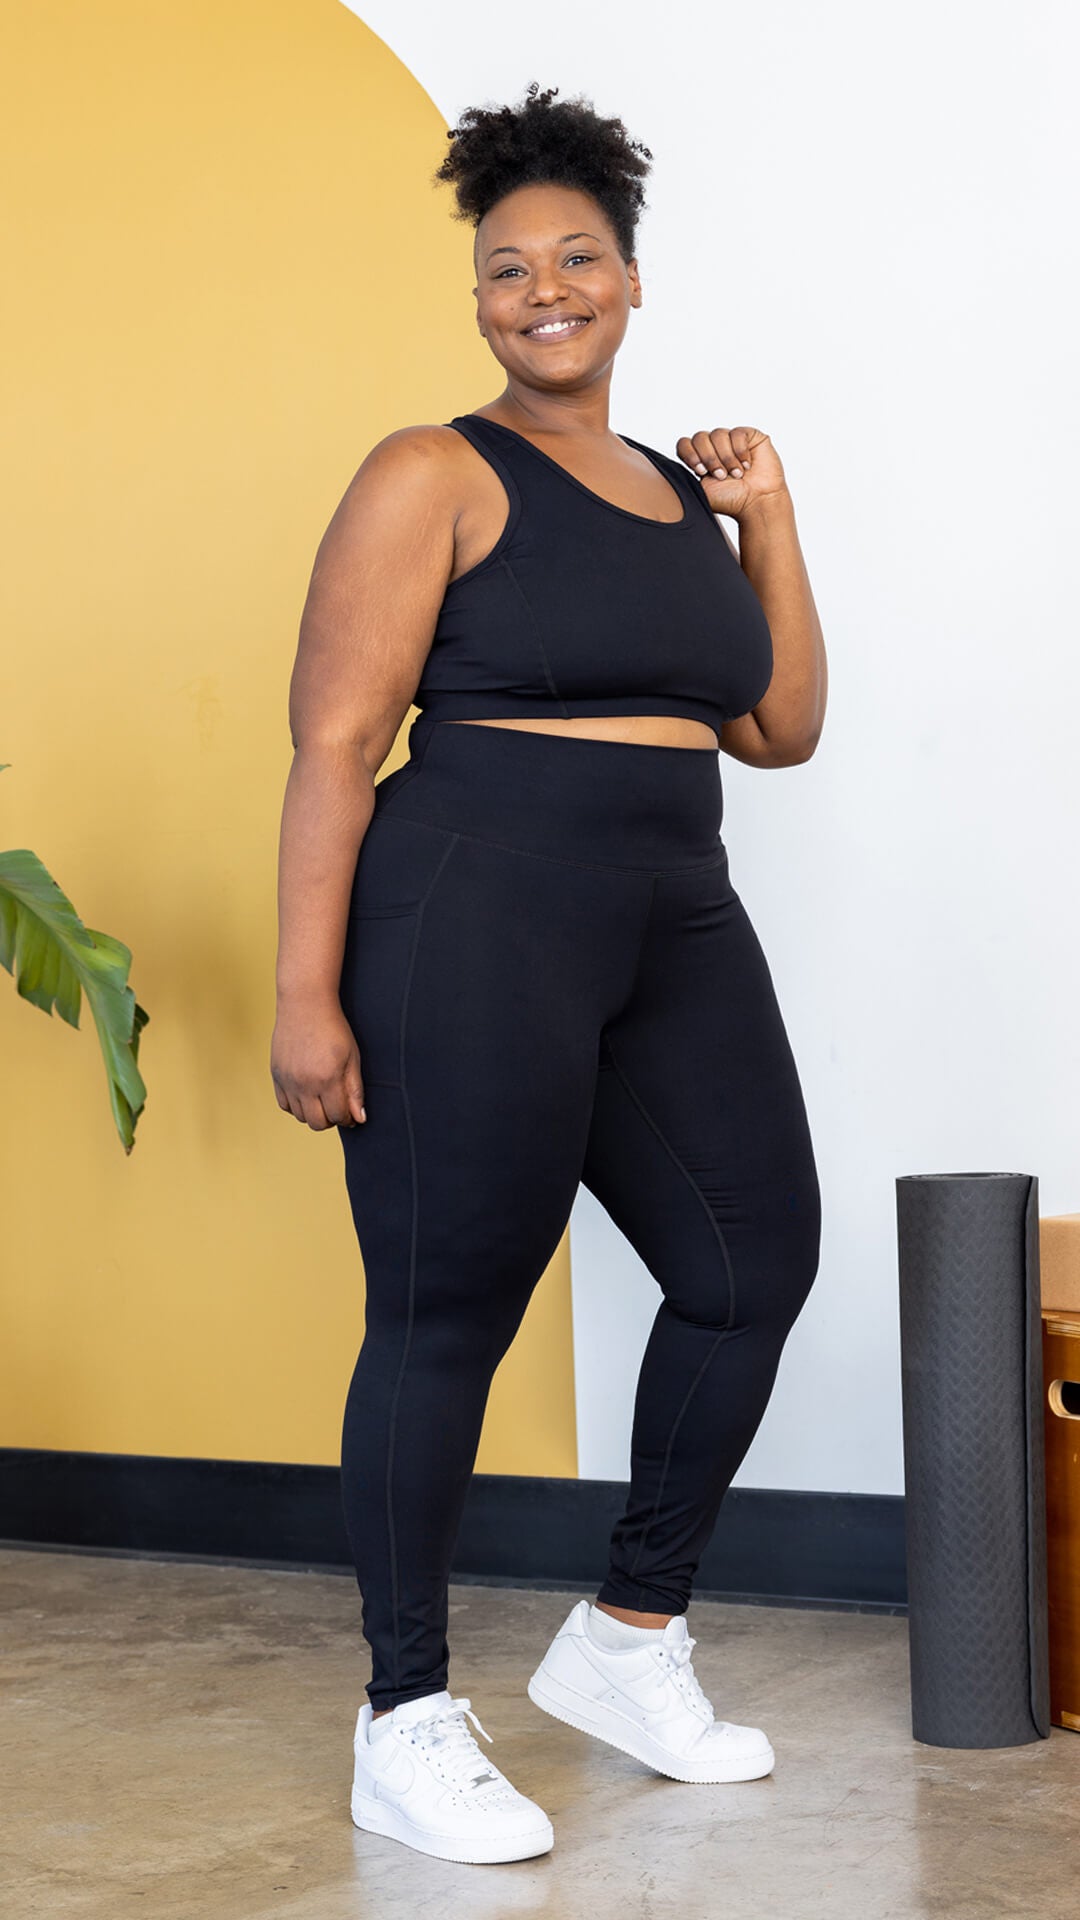 Superfit Hero Sponsored Superfit Hero is the only premium activewear brand  designed exclusively for plus size athletes. - iFunny